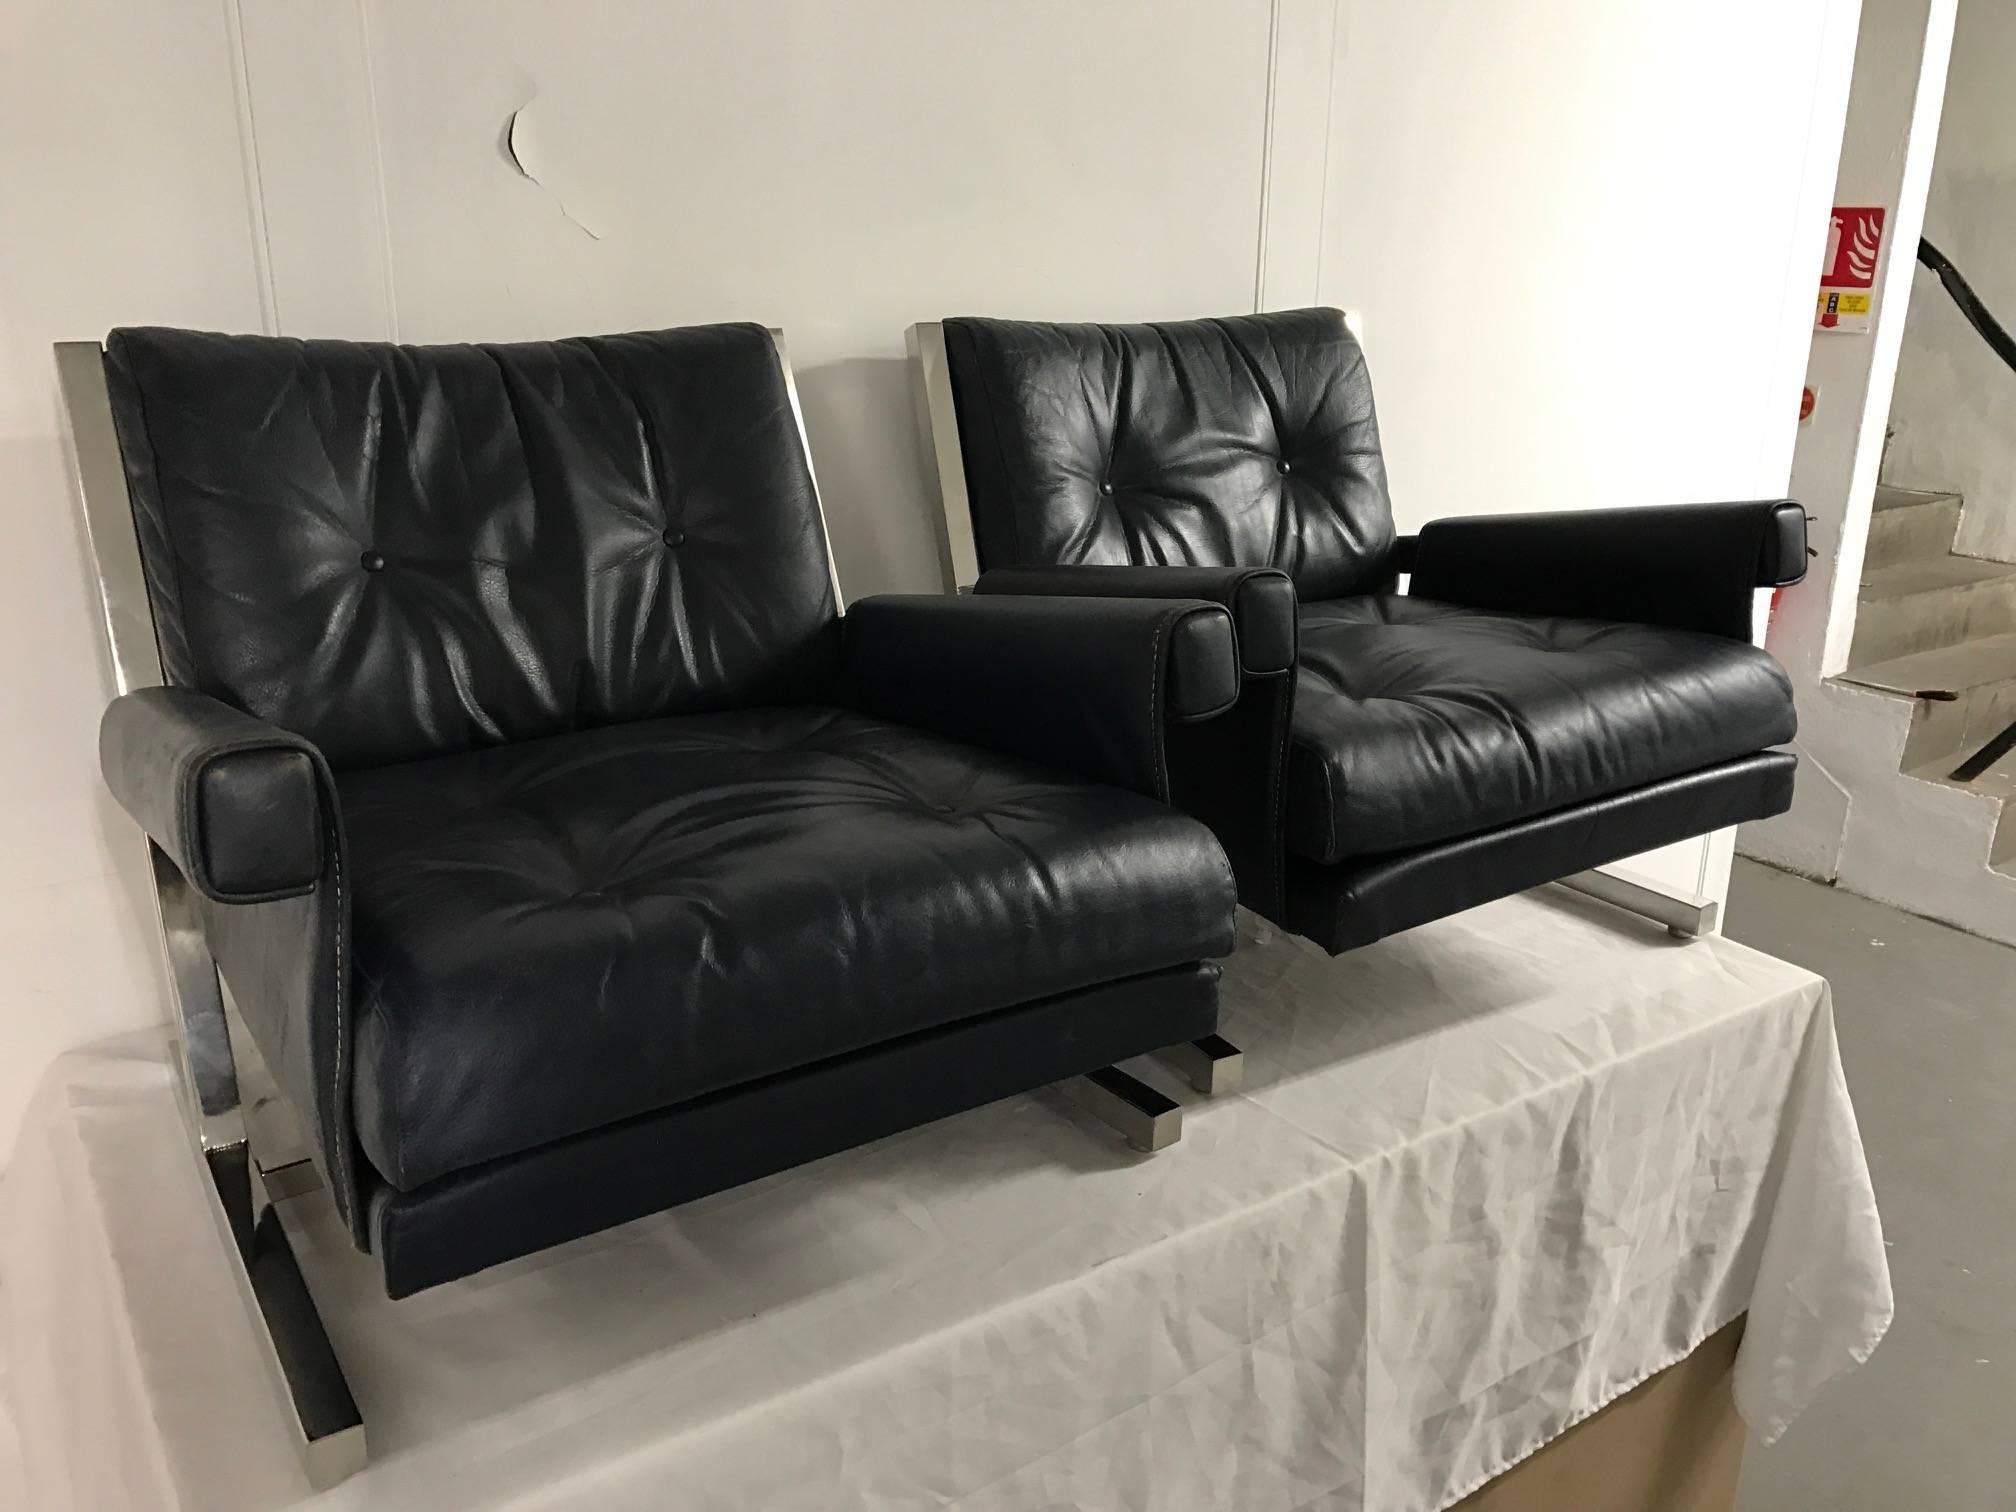 Pair of metal and leather armchairs by Jacques Quinet, France, 1950s. 
Leather recently restored.